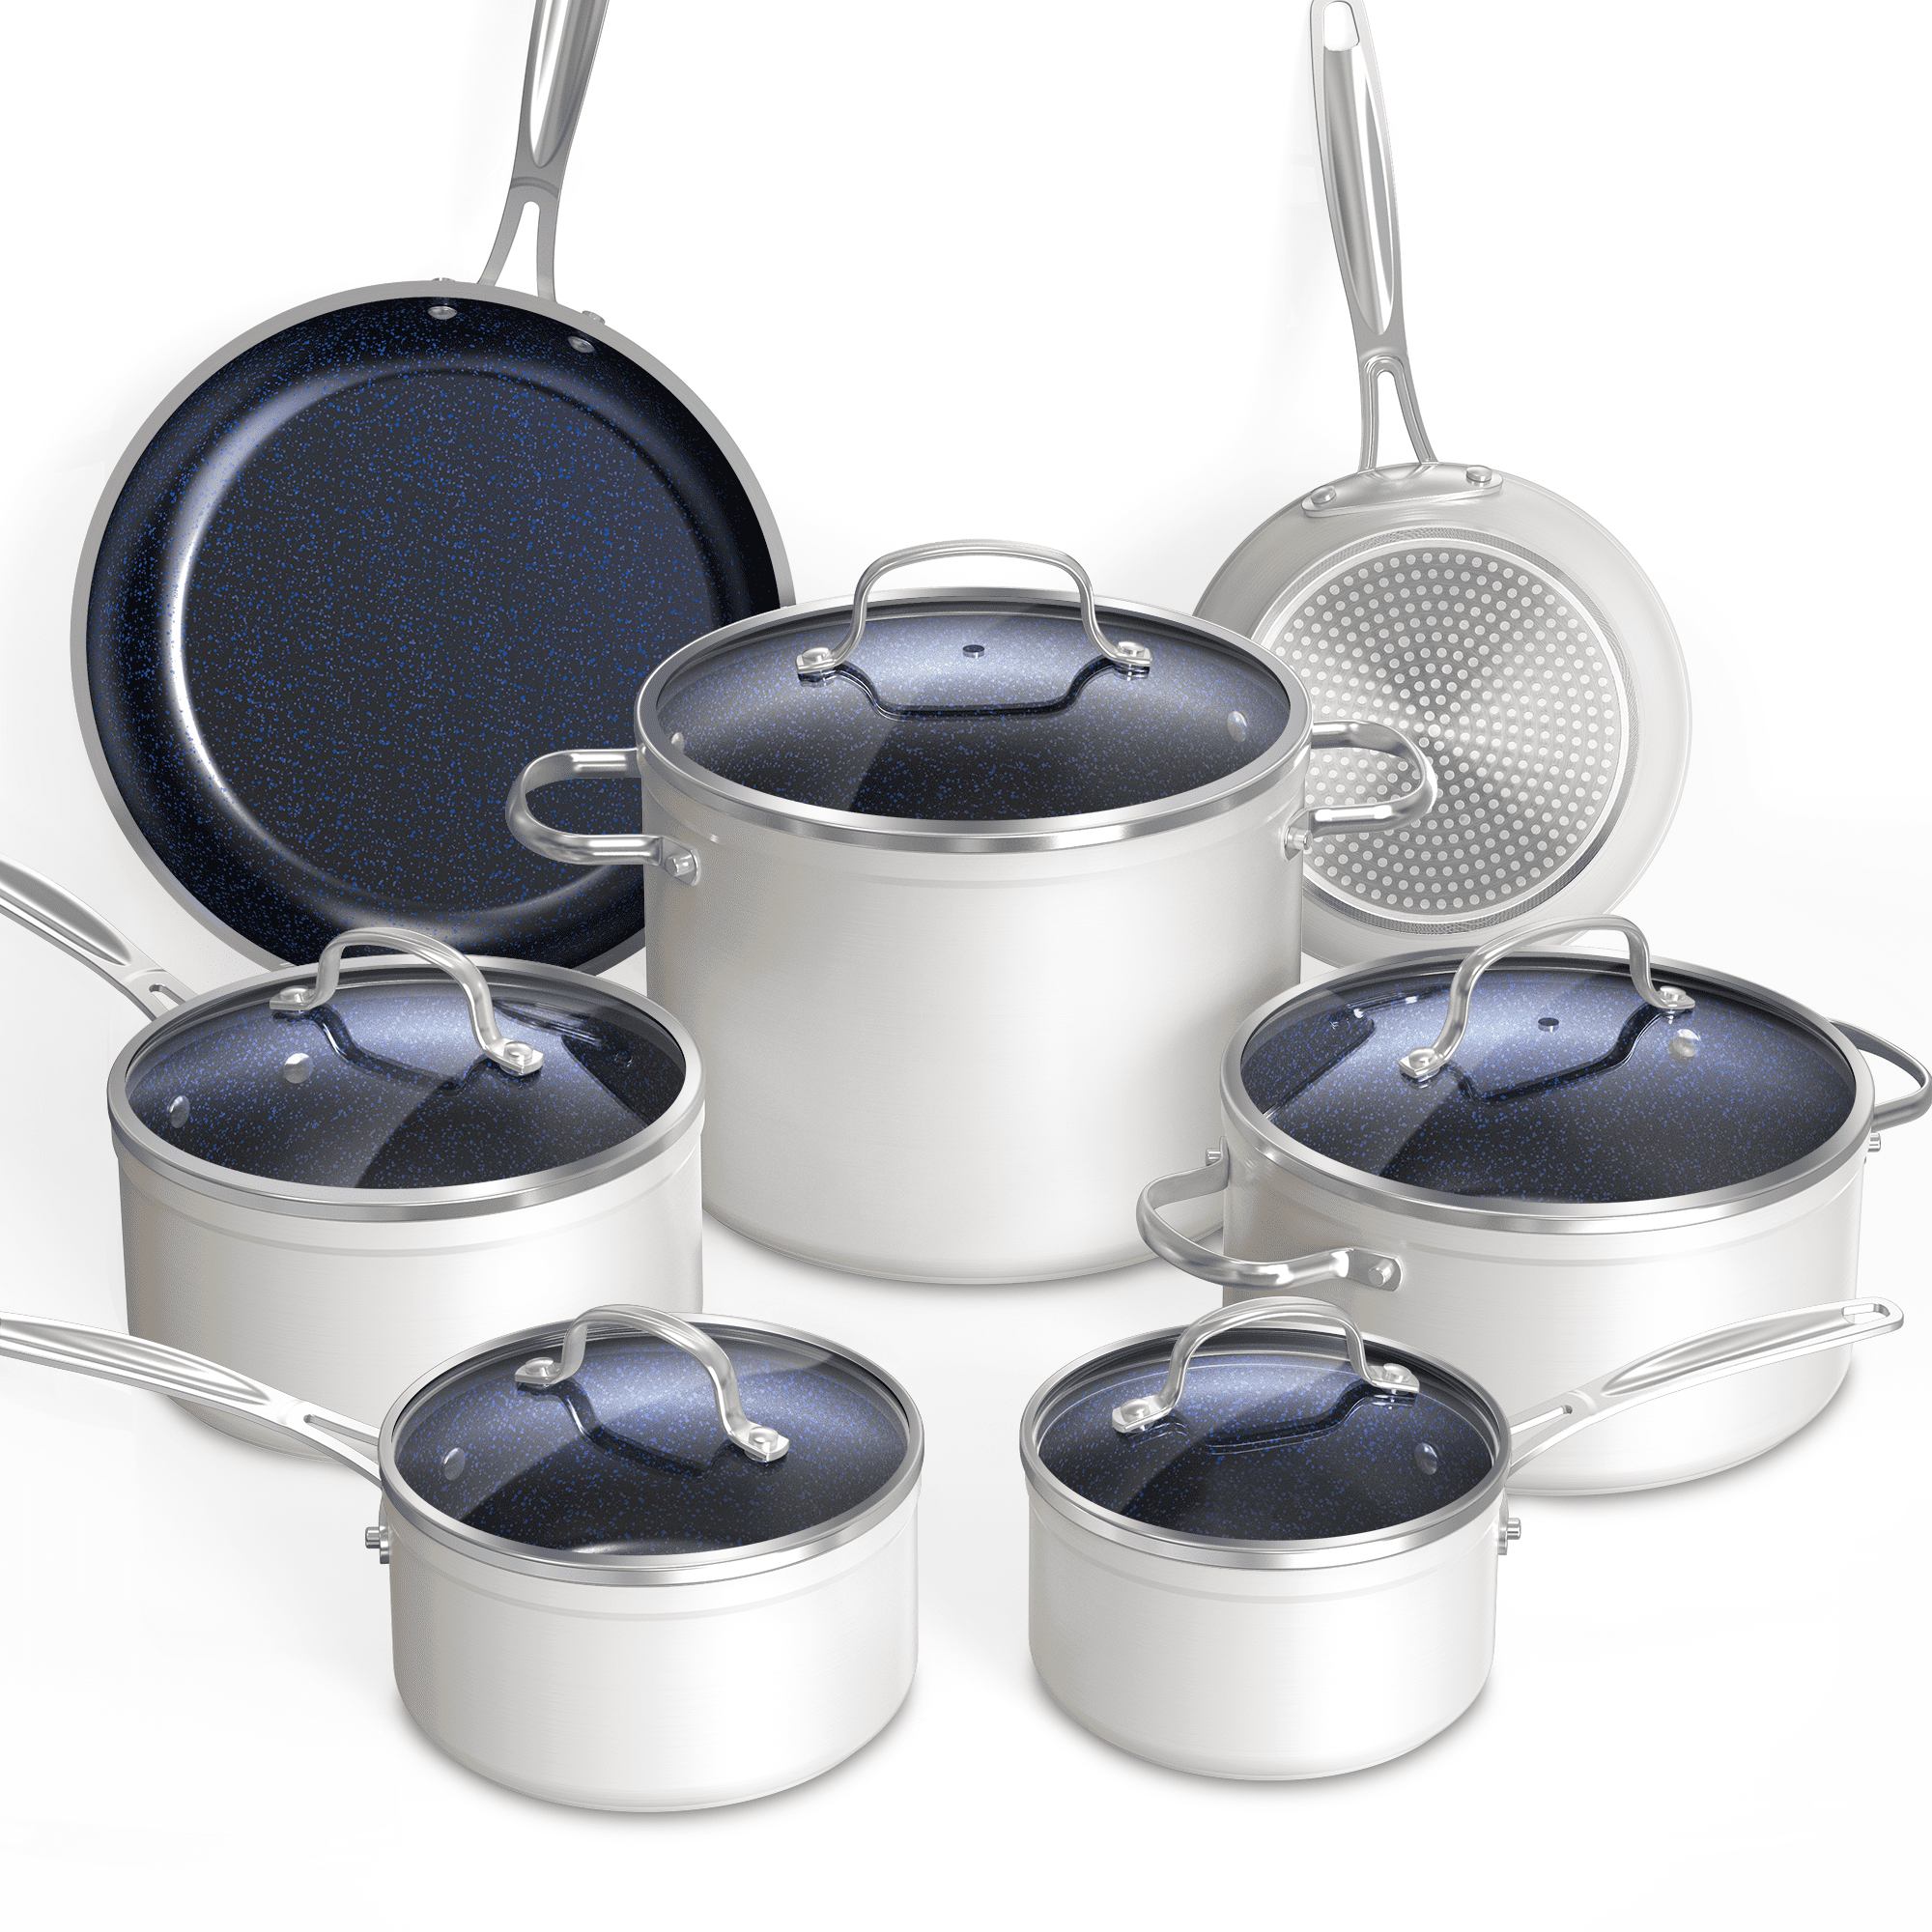  Nuwave Healthy Duralon Blue Ceramic Nonstick Coated 9pc Cookware  Set, Scratch-Resistant Diamond Infused, PFAS Free, Induction Ready & Evenly  Heats, Oven Safe, Tempered Glass Lids: Home & Kitchen